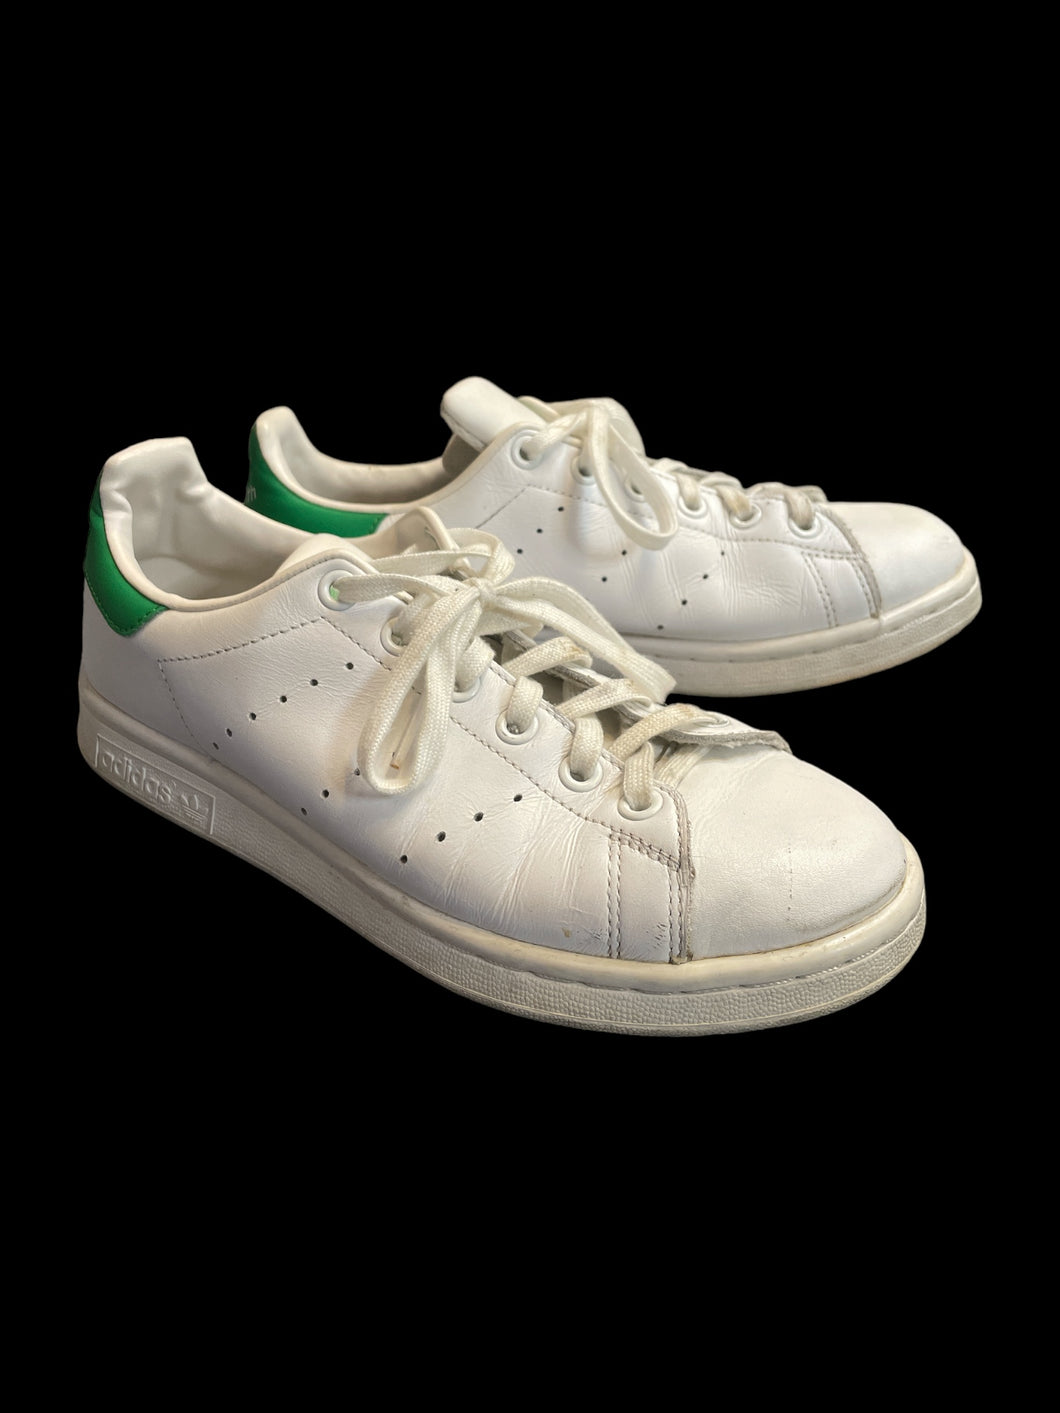 5M/6.5W White & green “Stan Smith” Adidas lace-up sneakers